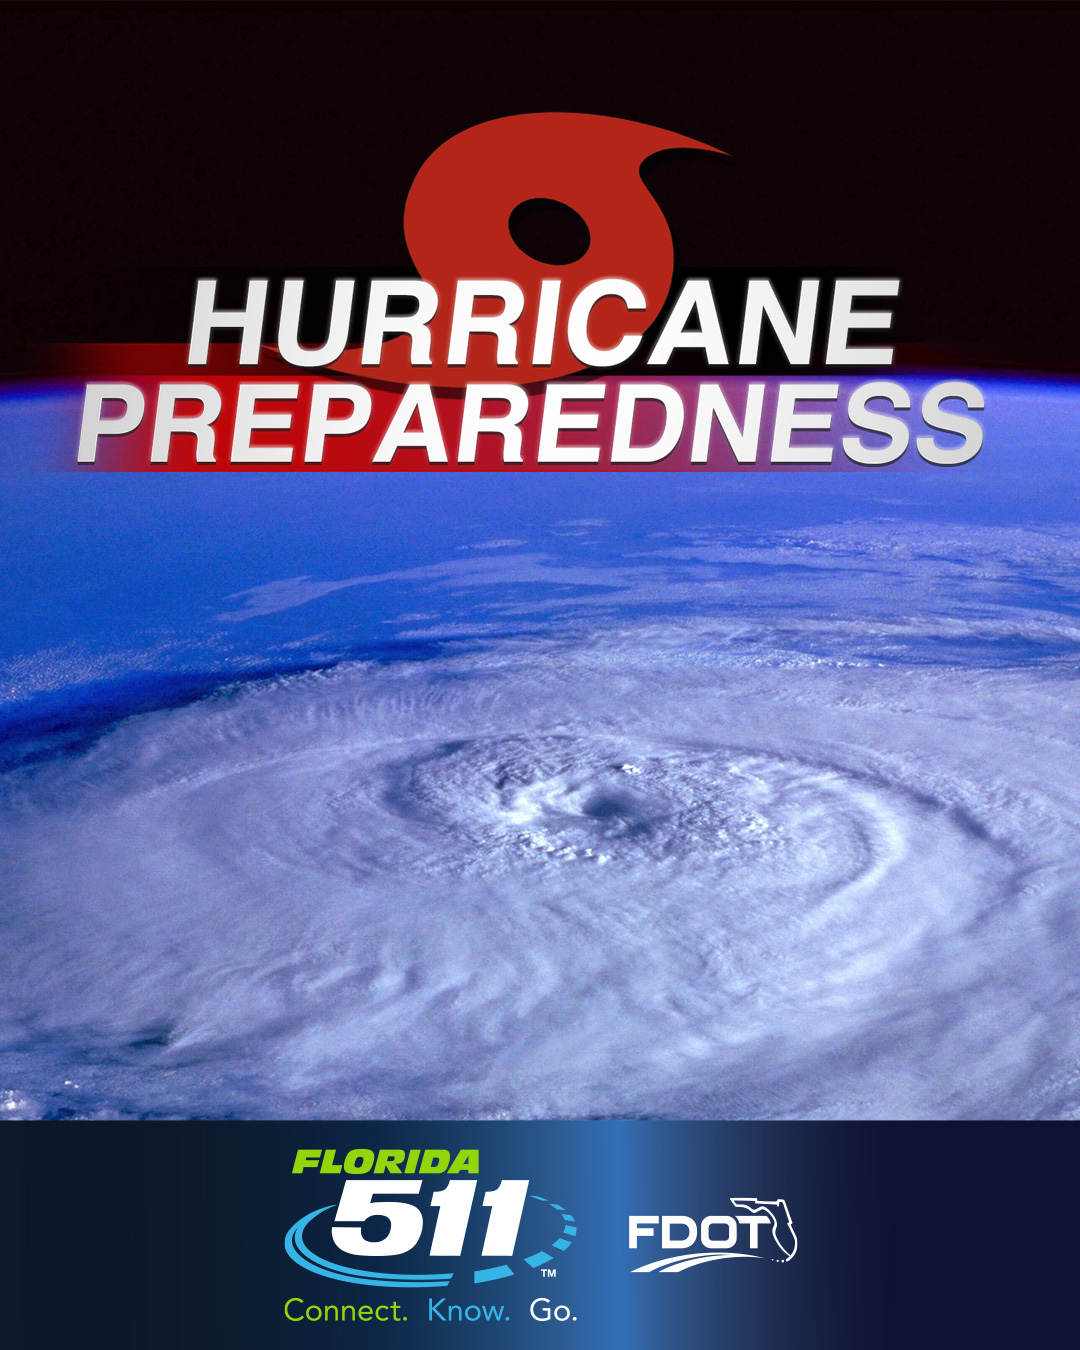 This Hurricane Season, Include FL511 in Your Plan